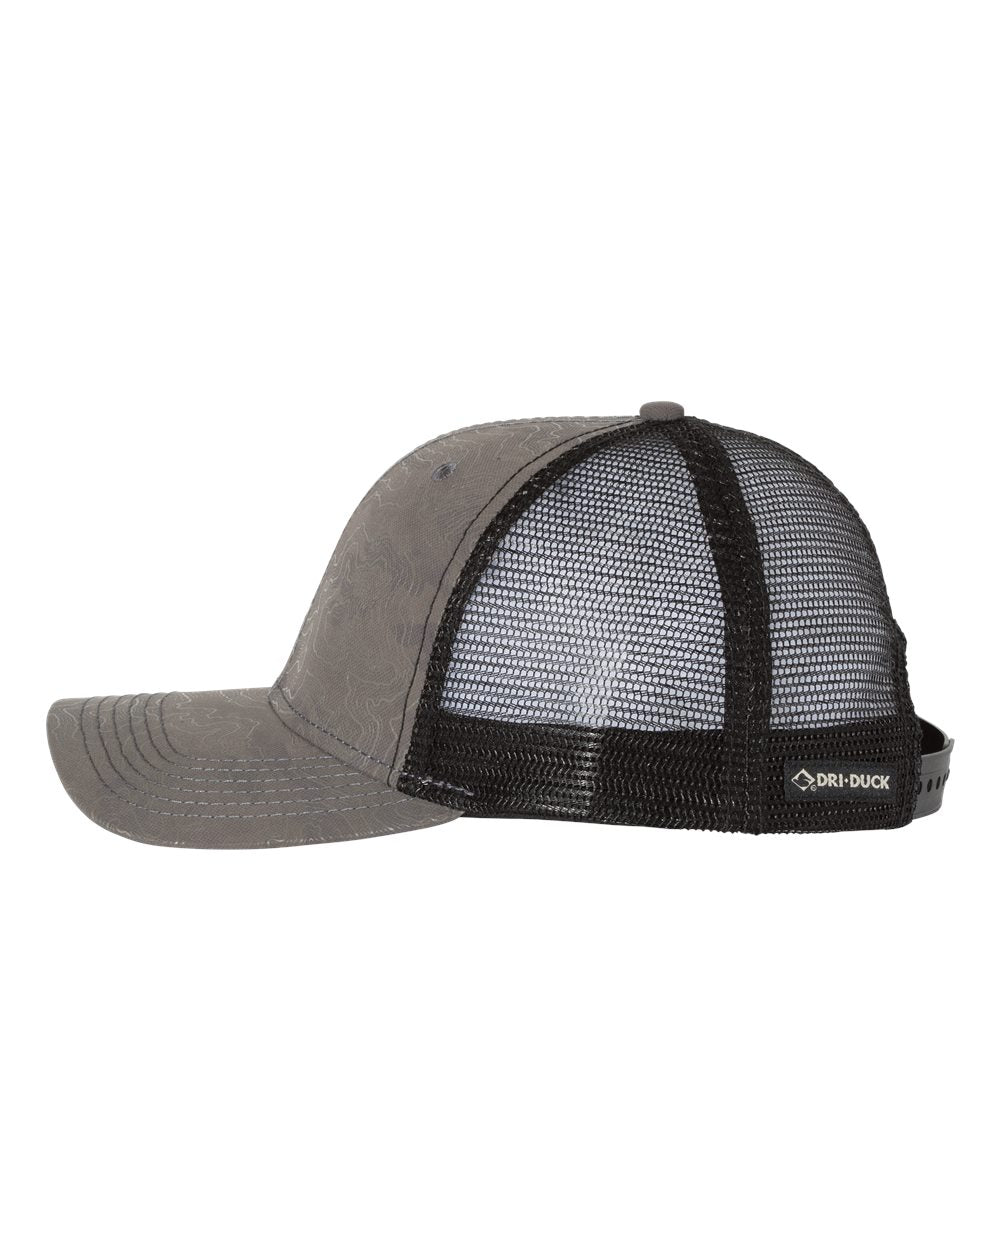  Image of the DRI DUCK Territory Trucker Cap in Charcoal, showcasing its classic trucker design and charcoal color, perfect for outdoor adventures.